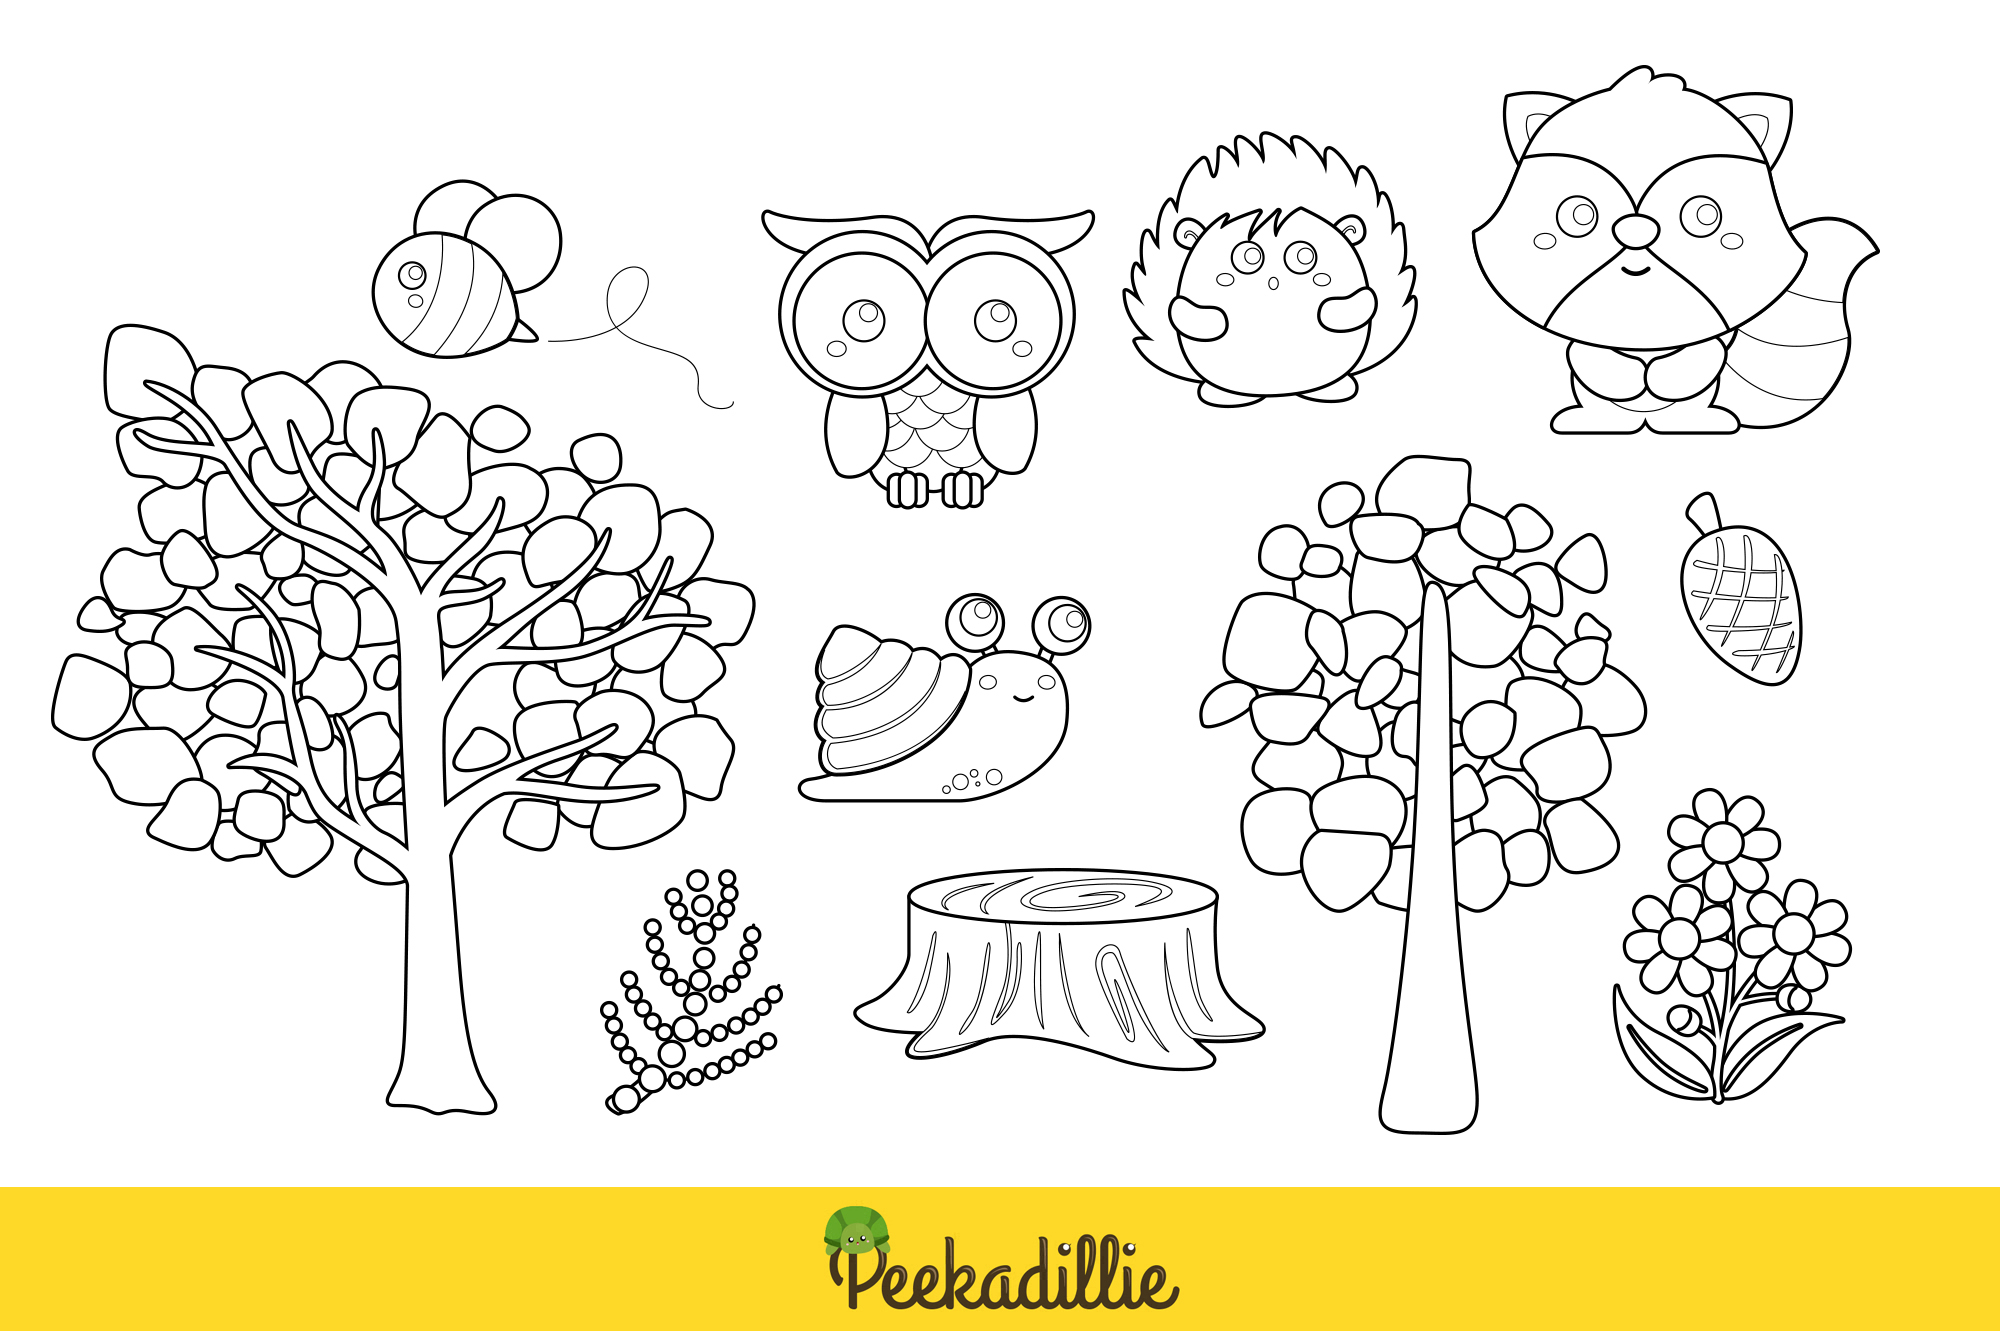 Coloring page with trees and owls.